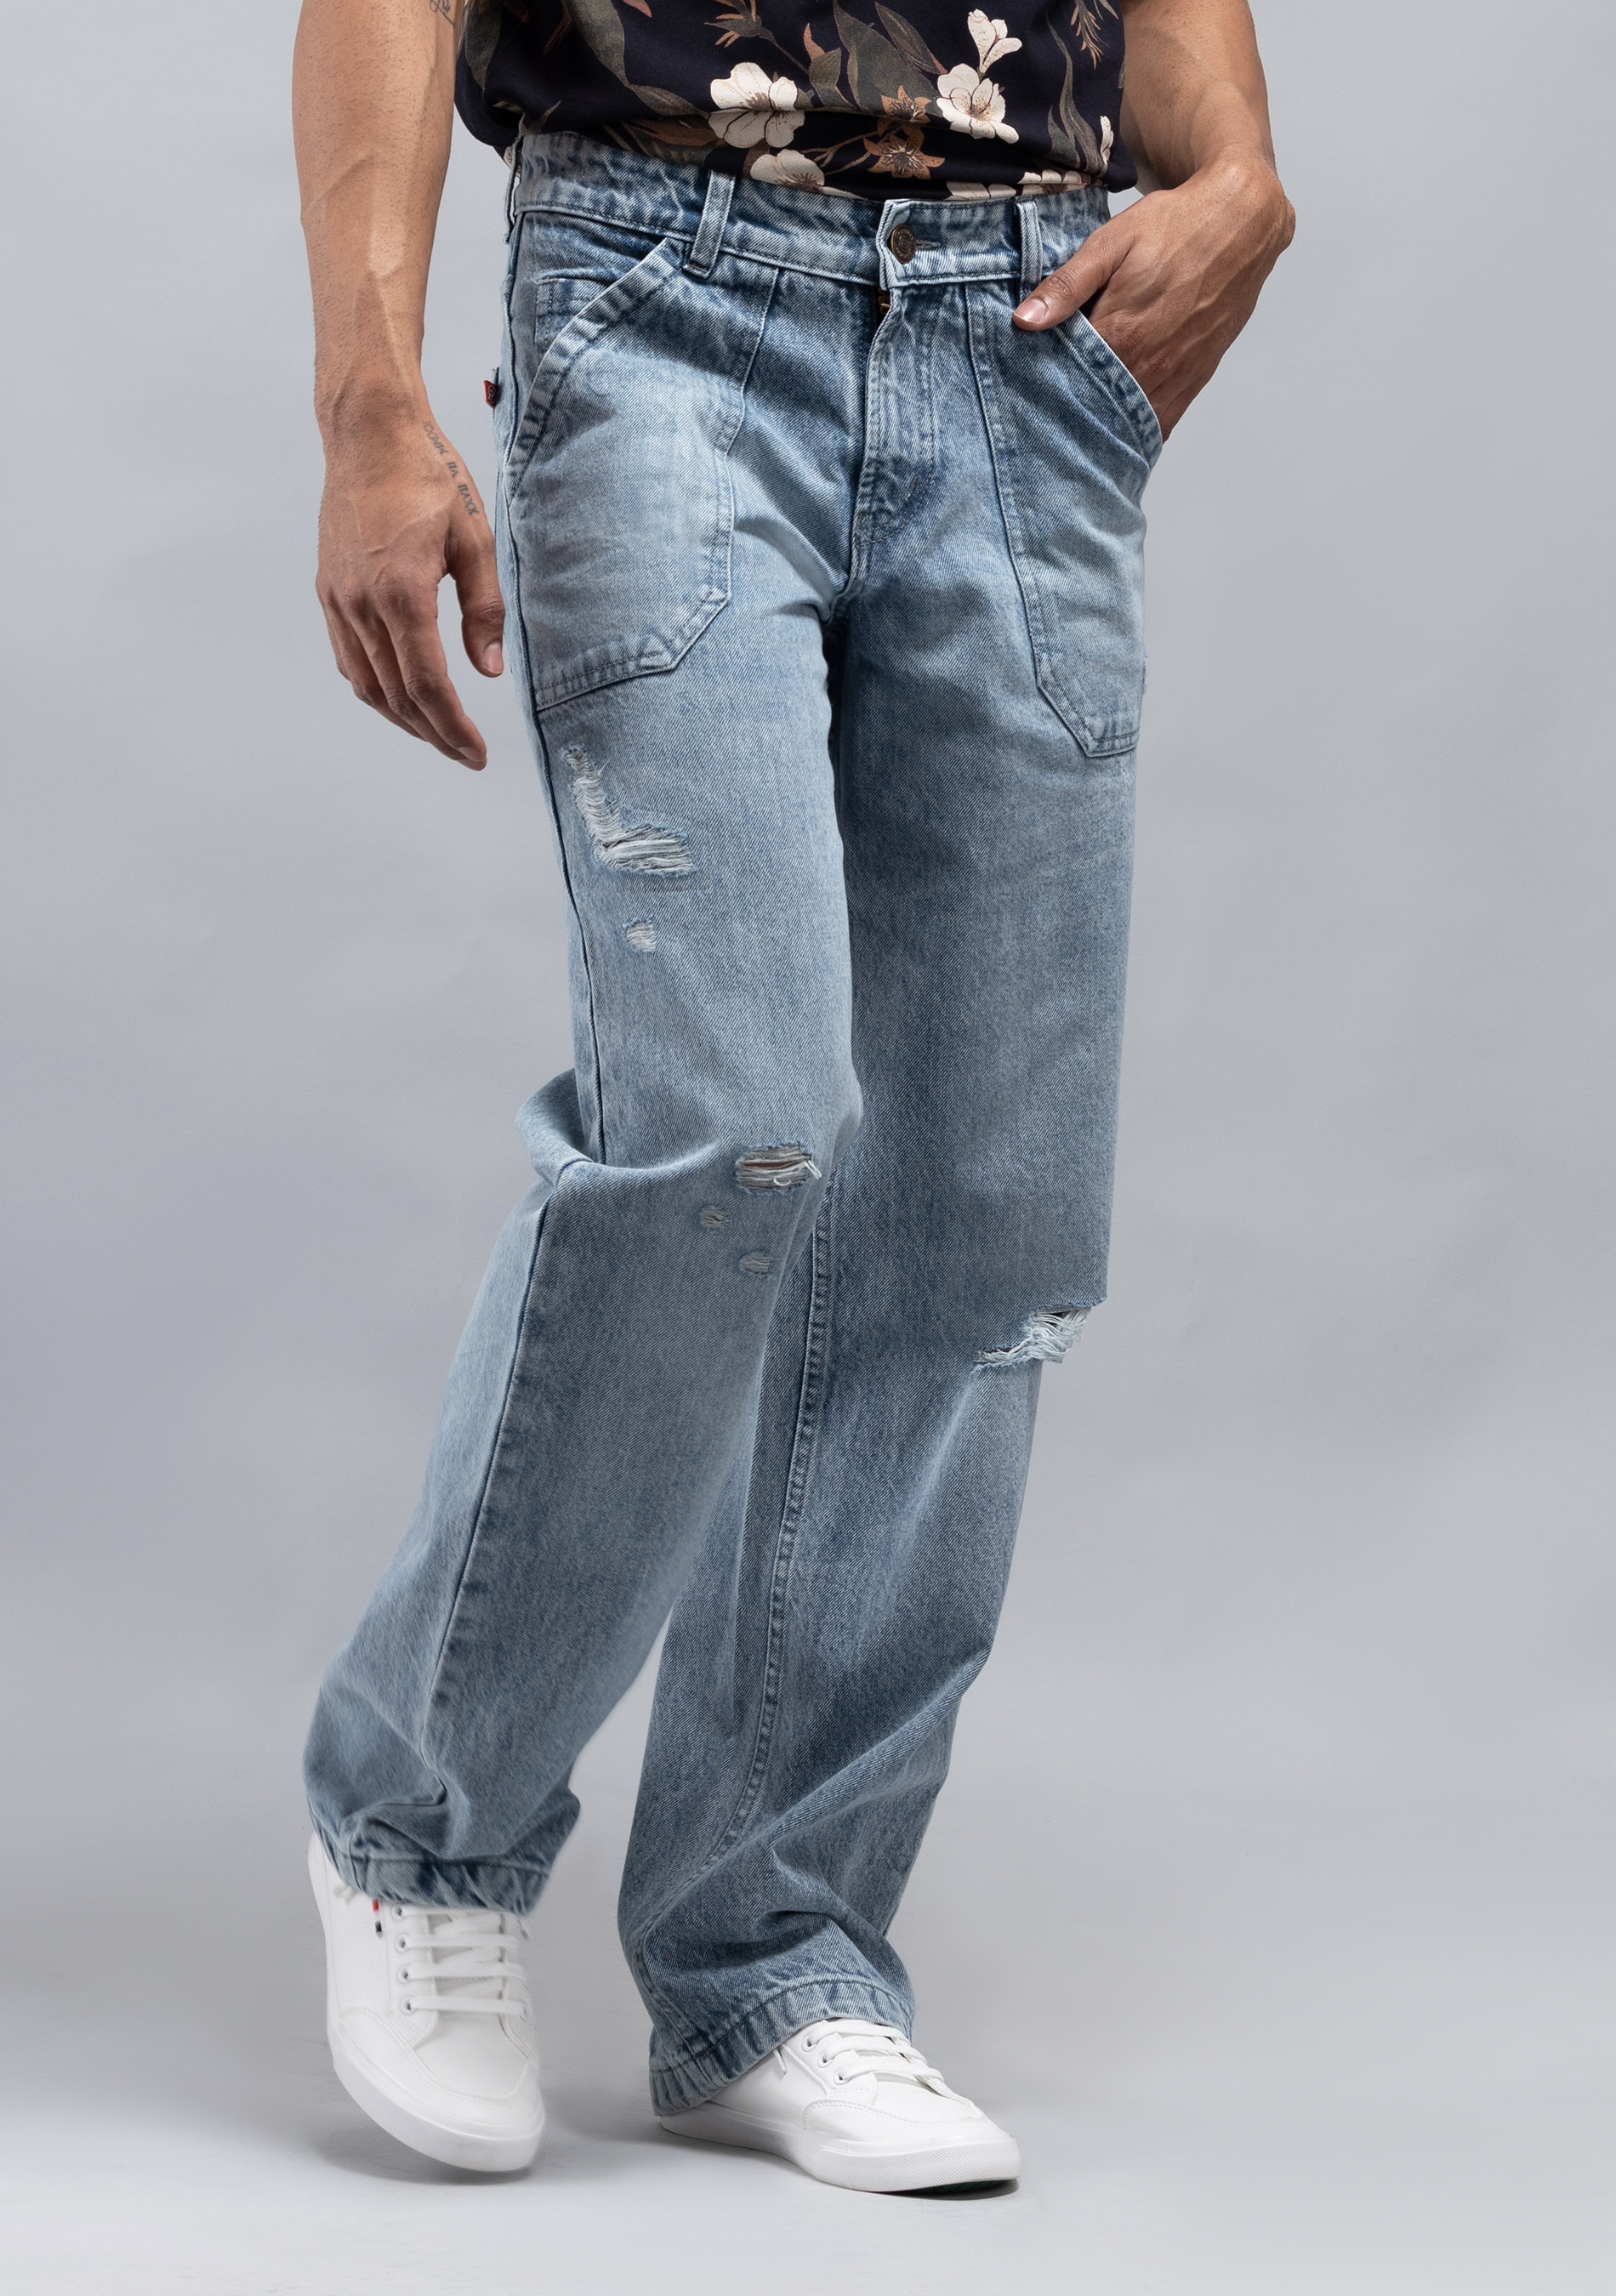 Sky Blue Wide Leg Cotton Fashion Jeans - Buy Online in India @ Mehar